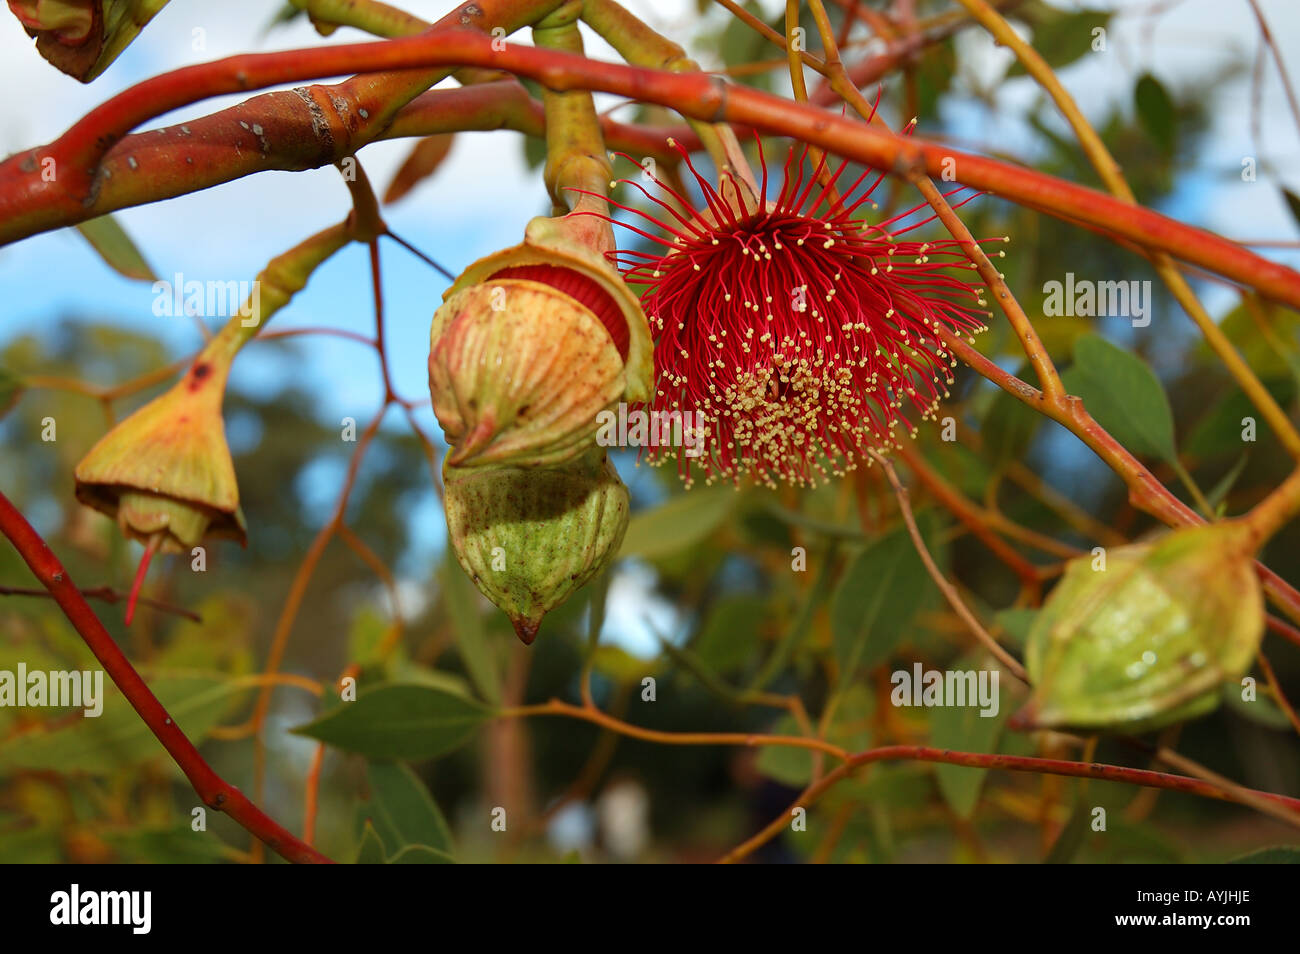 Spectacular flowers of the pear fruited mallee Eucalyptus pyriformis a native Western Australian tree Stock Photo